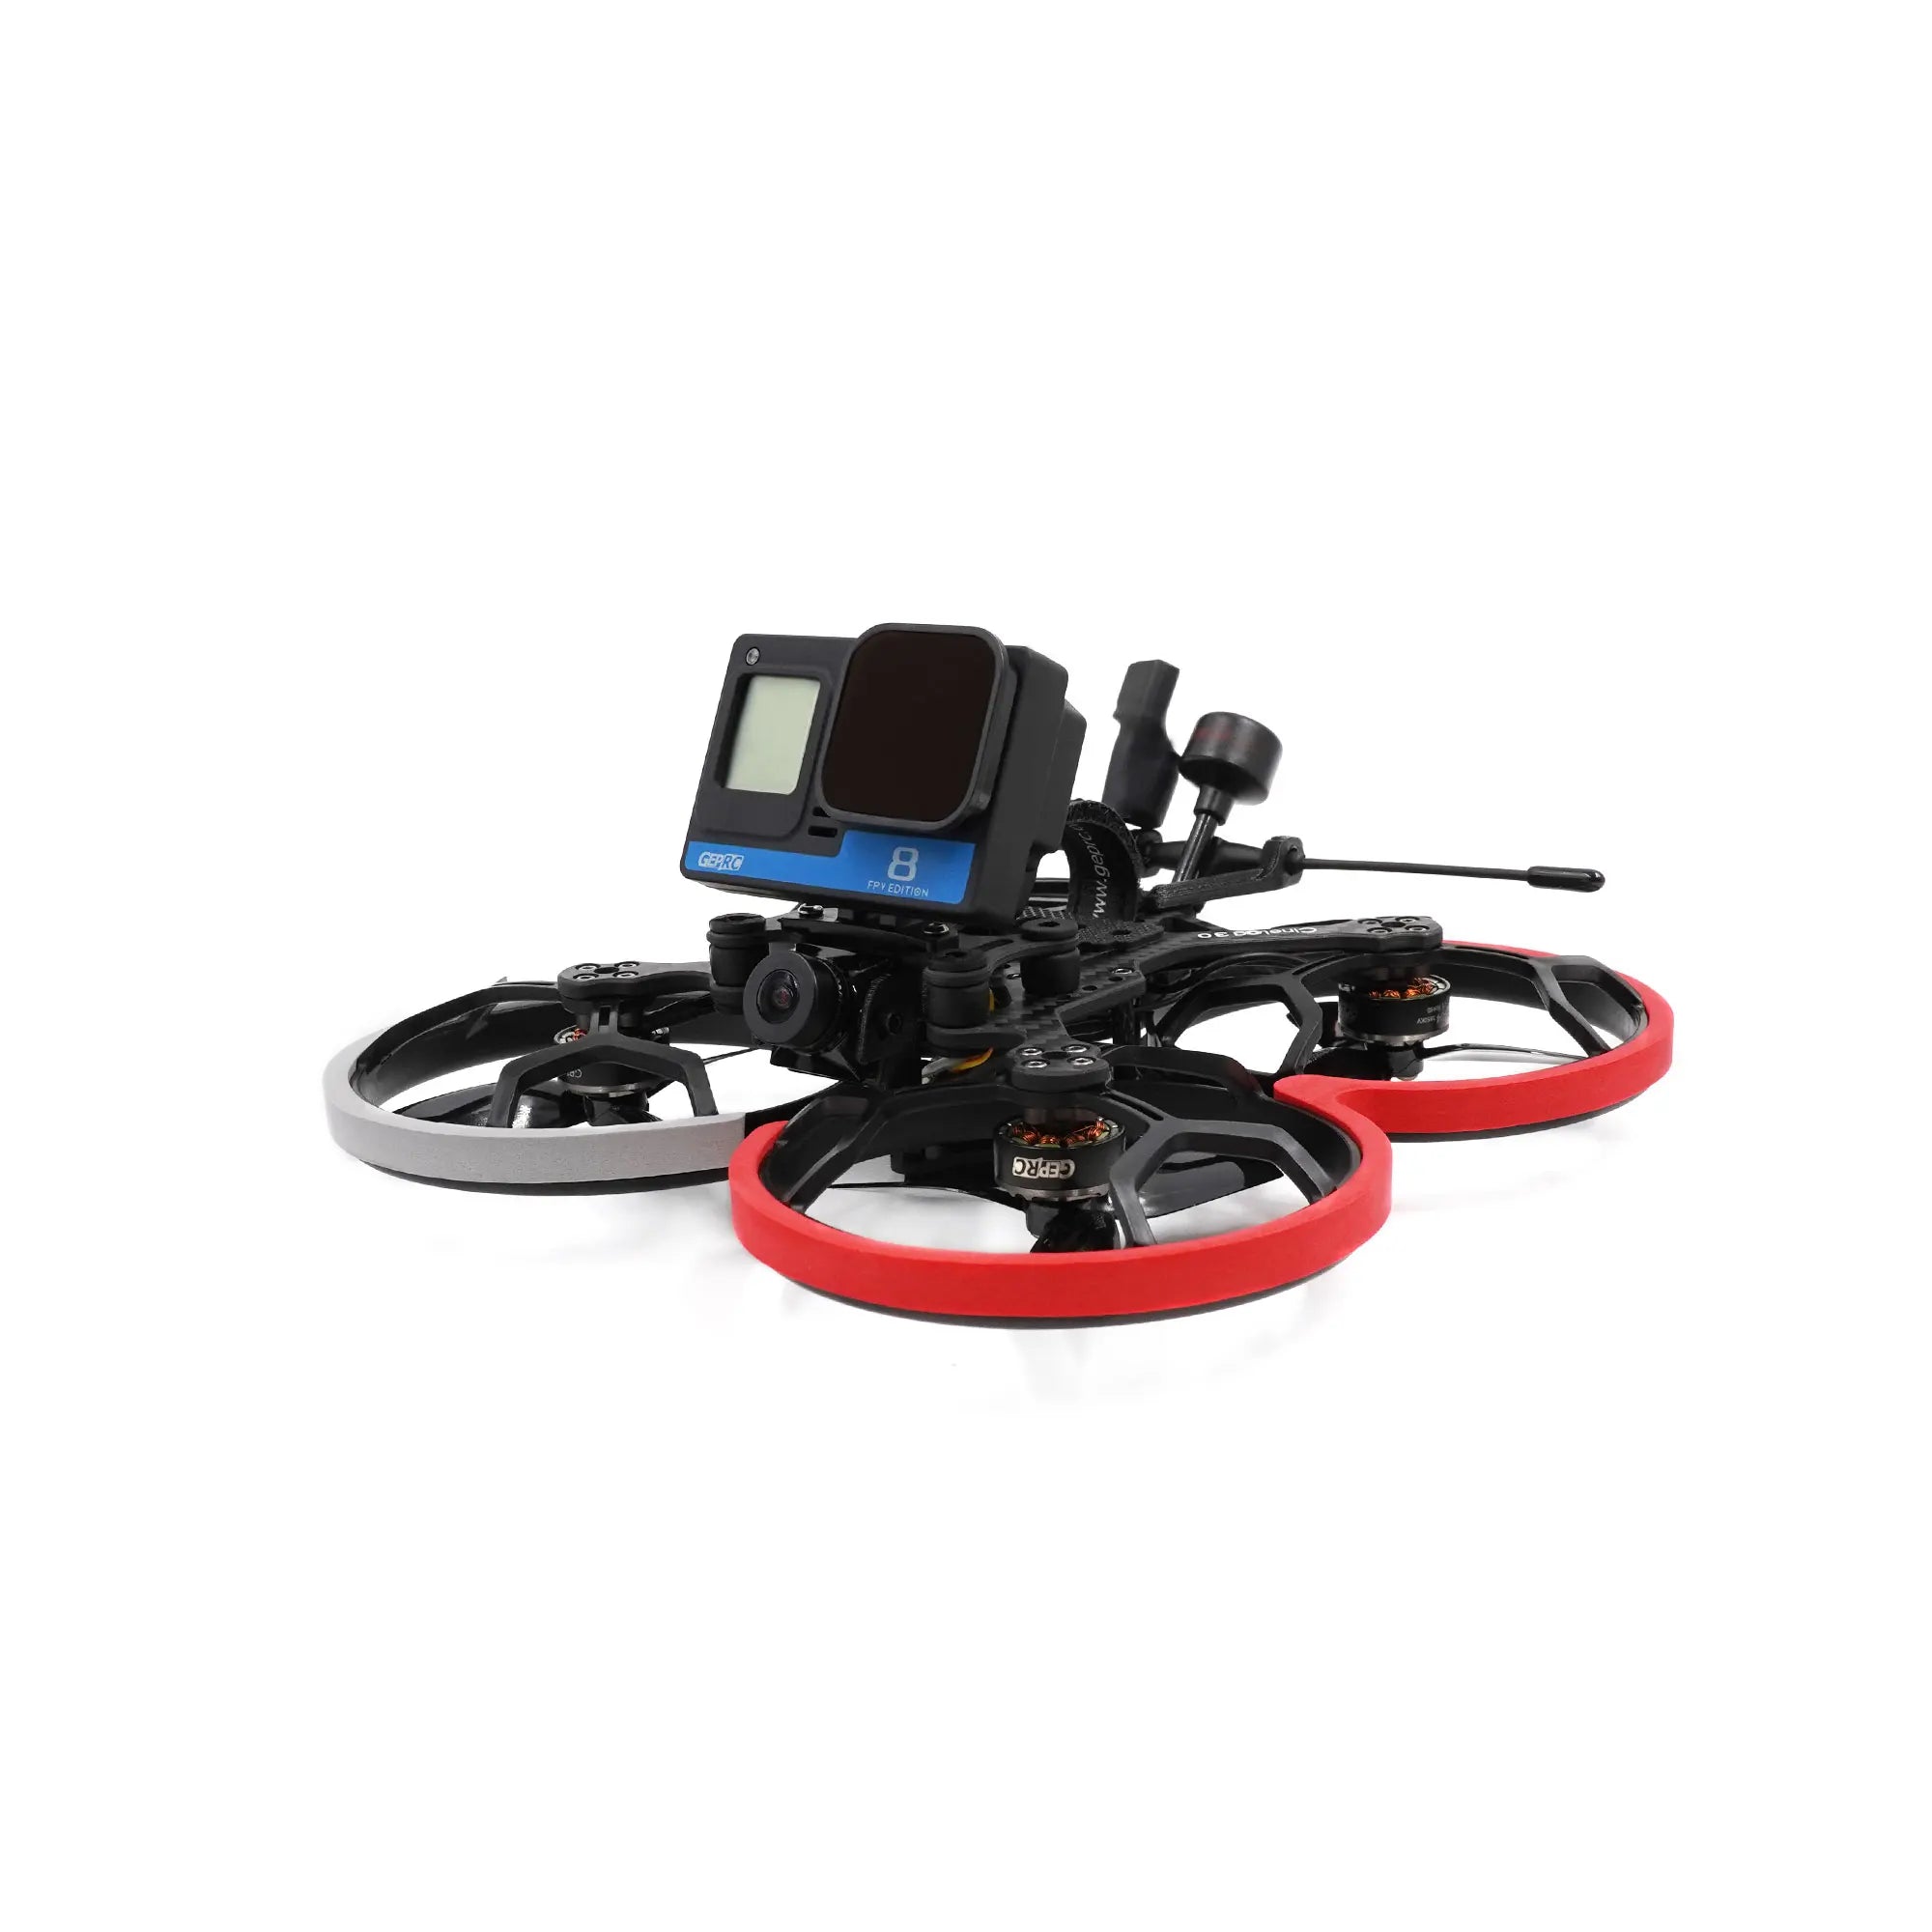 GEPRC CineLog30 Cinewhoop Drone, the GEPRC CineLog30 Analog features a lightweight frame and compact size .